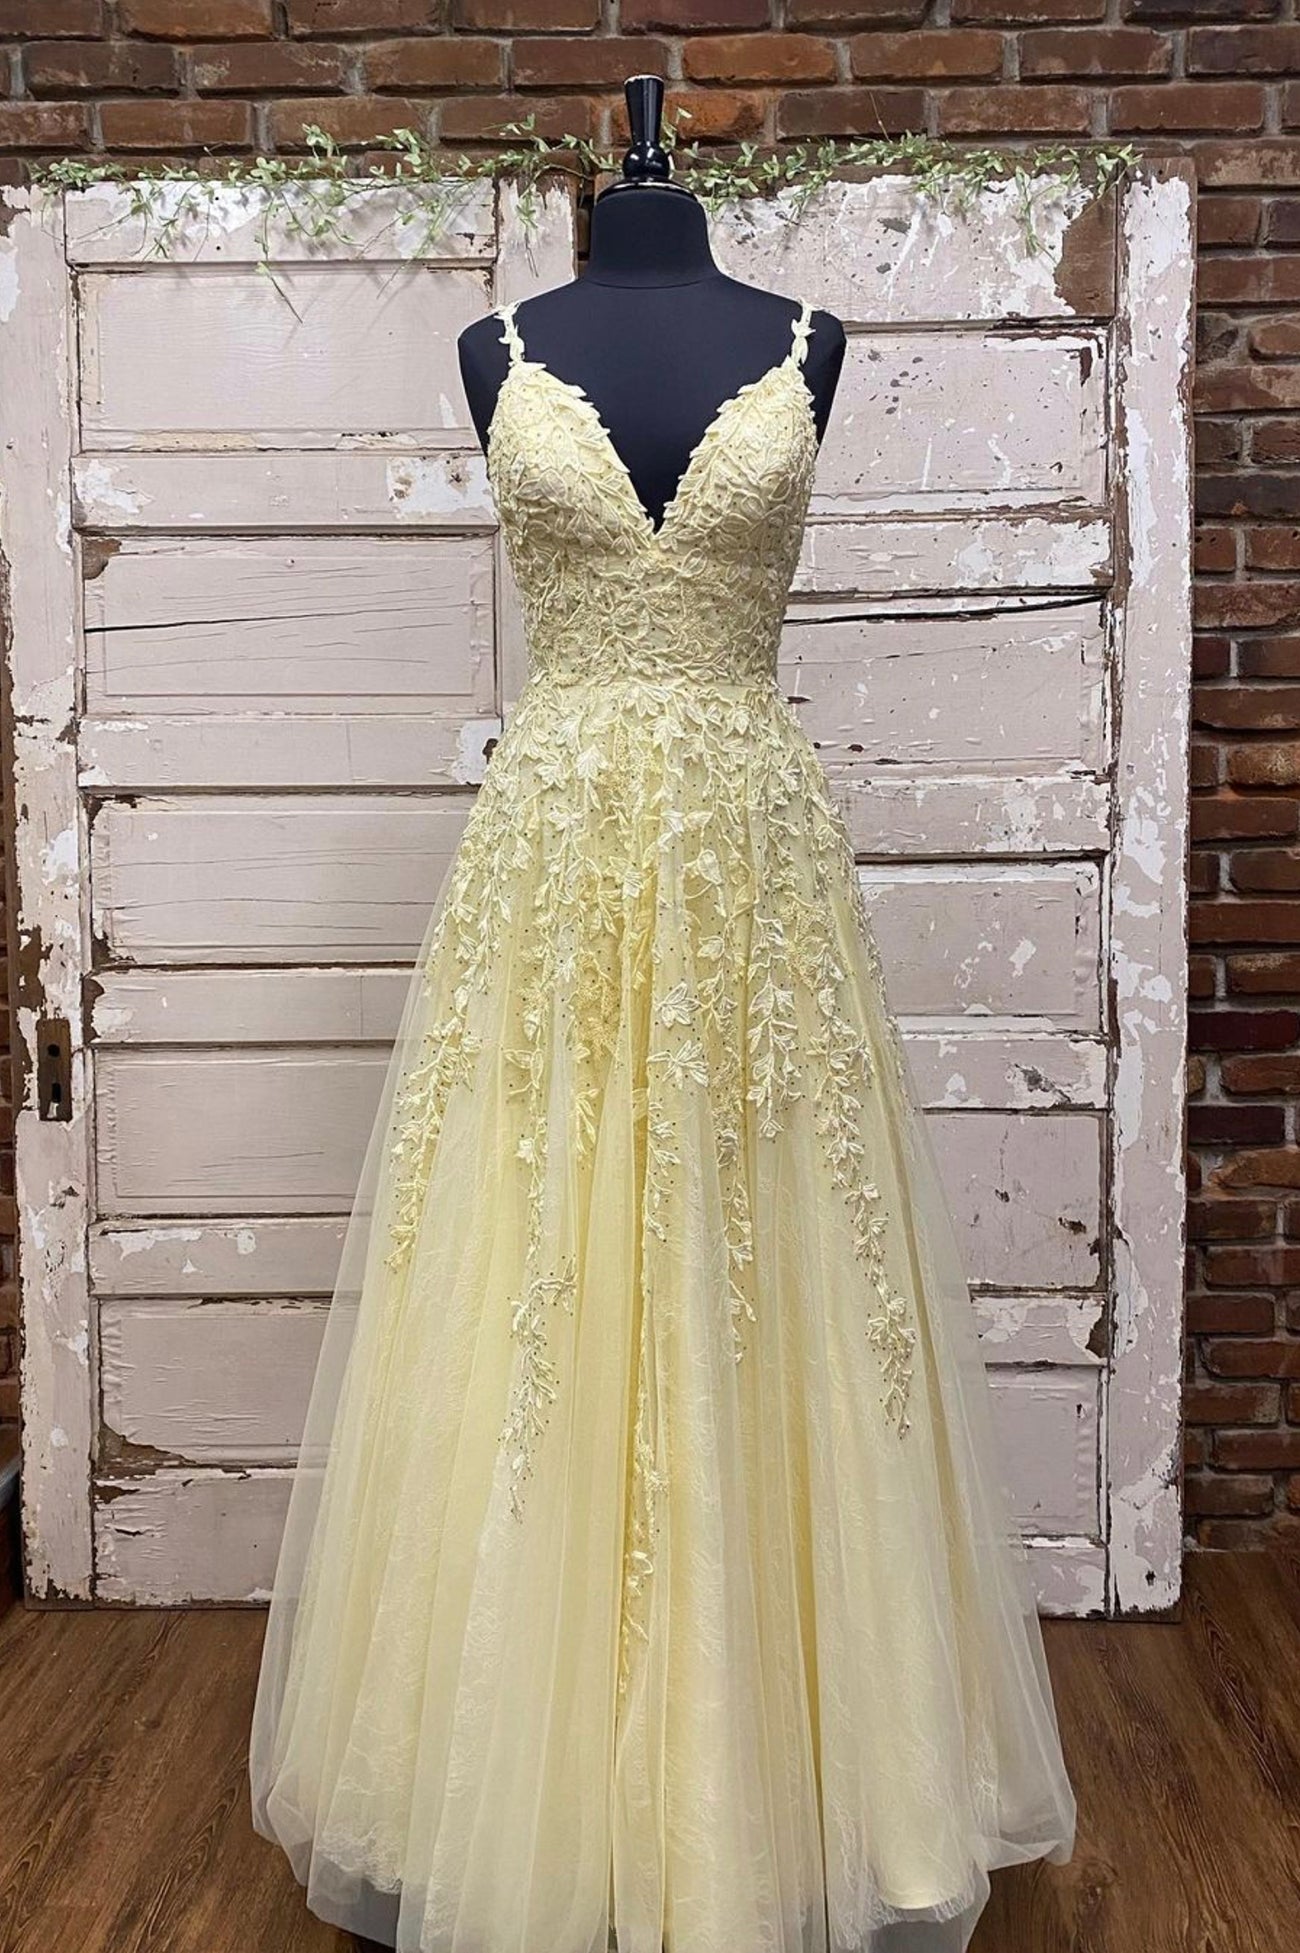 Yellow V-Neck Lace Long Corset Prom Dress, A-Line Spaghetti Straps Evening Dress outfit, Prom Dress Ideas